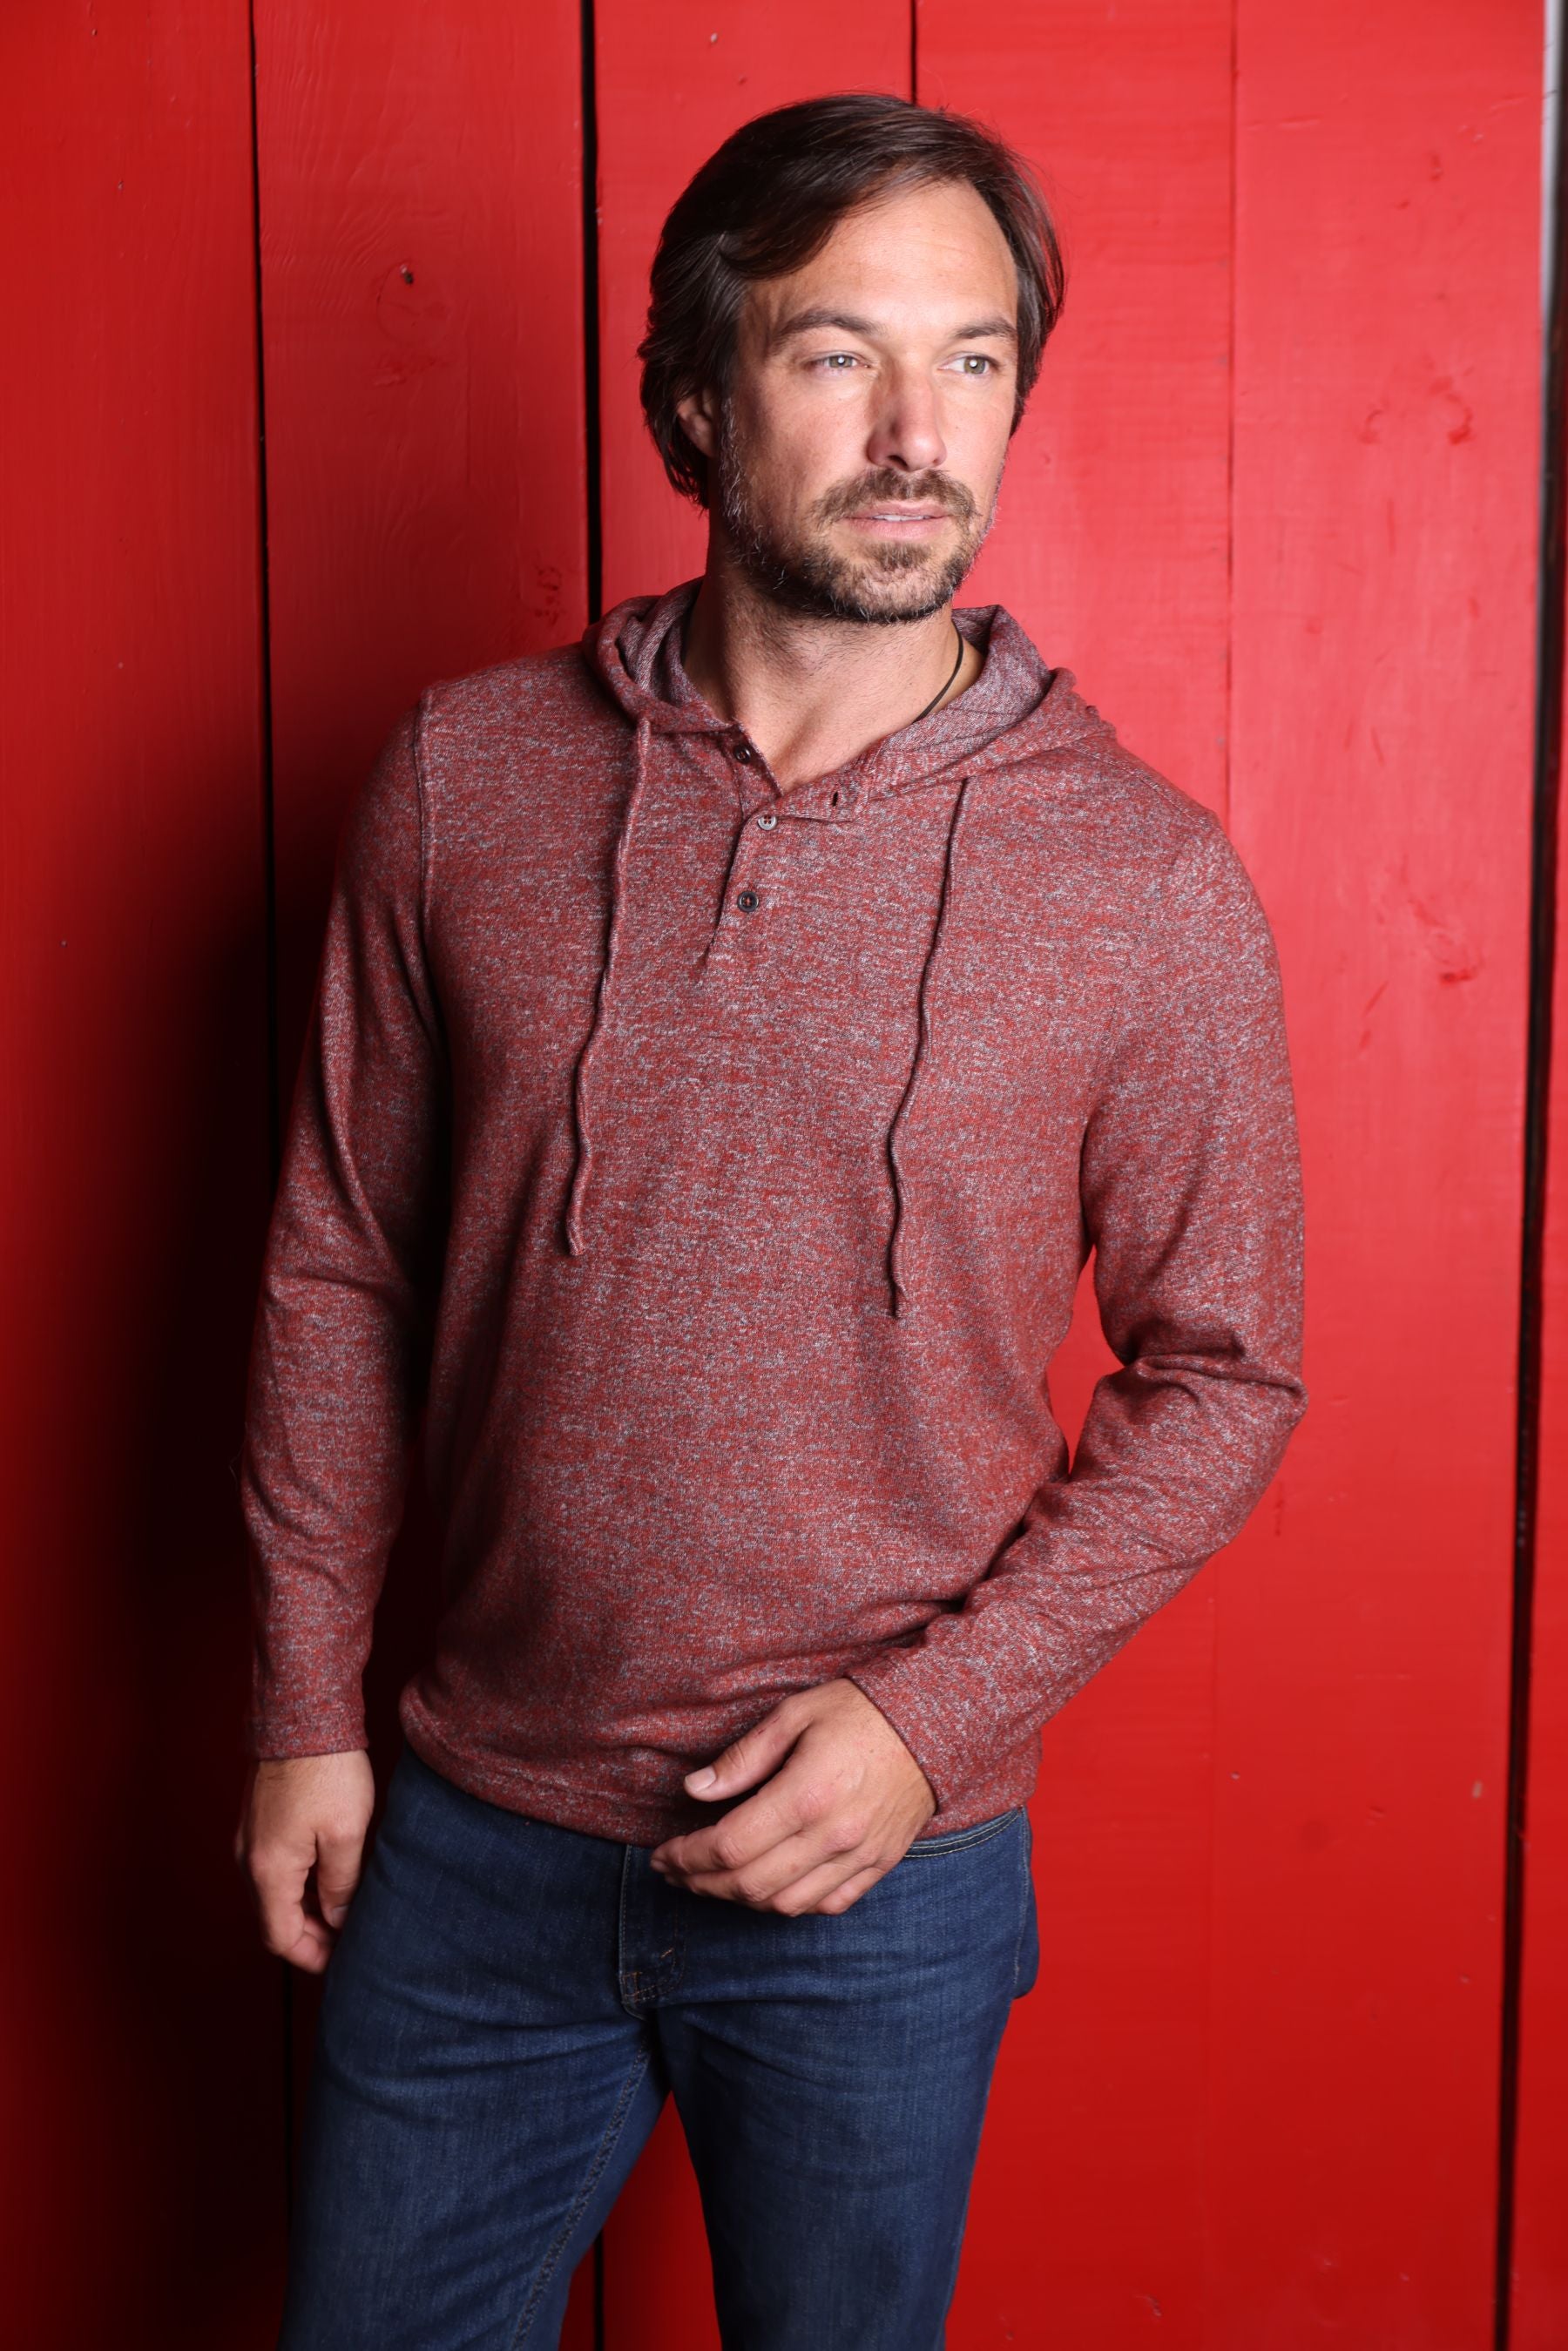 Our ZN0785 Comfort Hoodie is the perfect combination of casual style and comfort. Thanks to a lightweight cotton-poly microfiber fabric, it provides the cozy feeling of cashmere without the cost or fuzzy traits. With a red wine hue and gray texture, striking fine texture, open sleeves and bottom, and classic fit, you'll look and feel great.